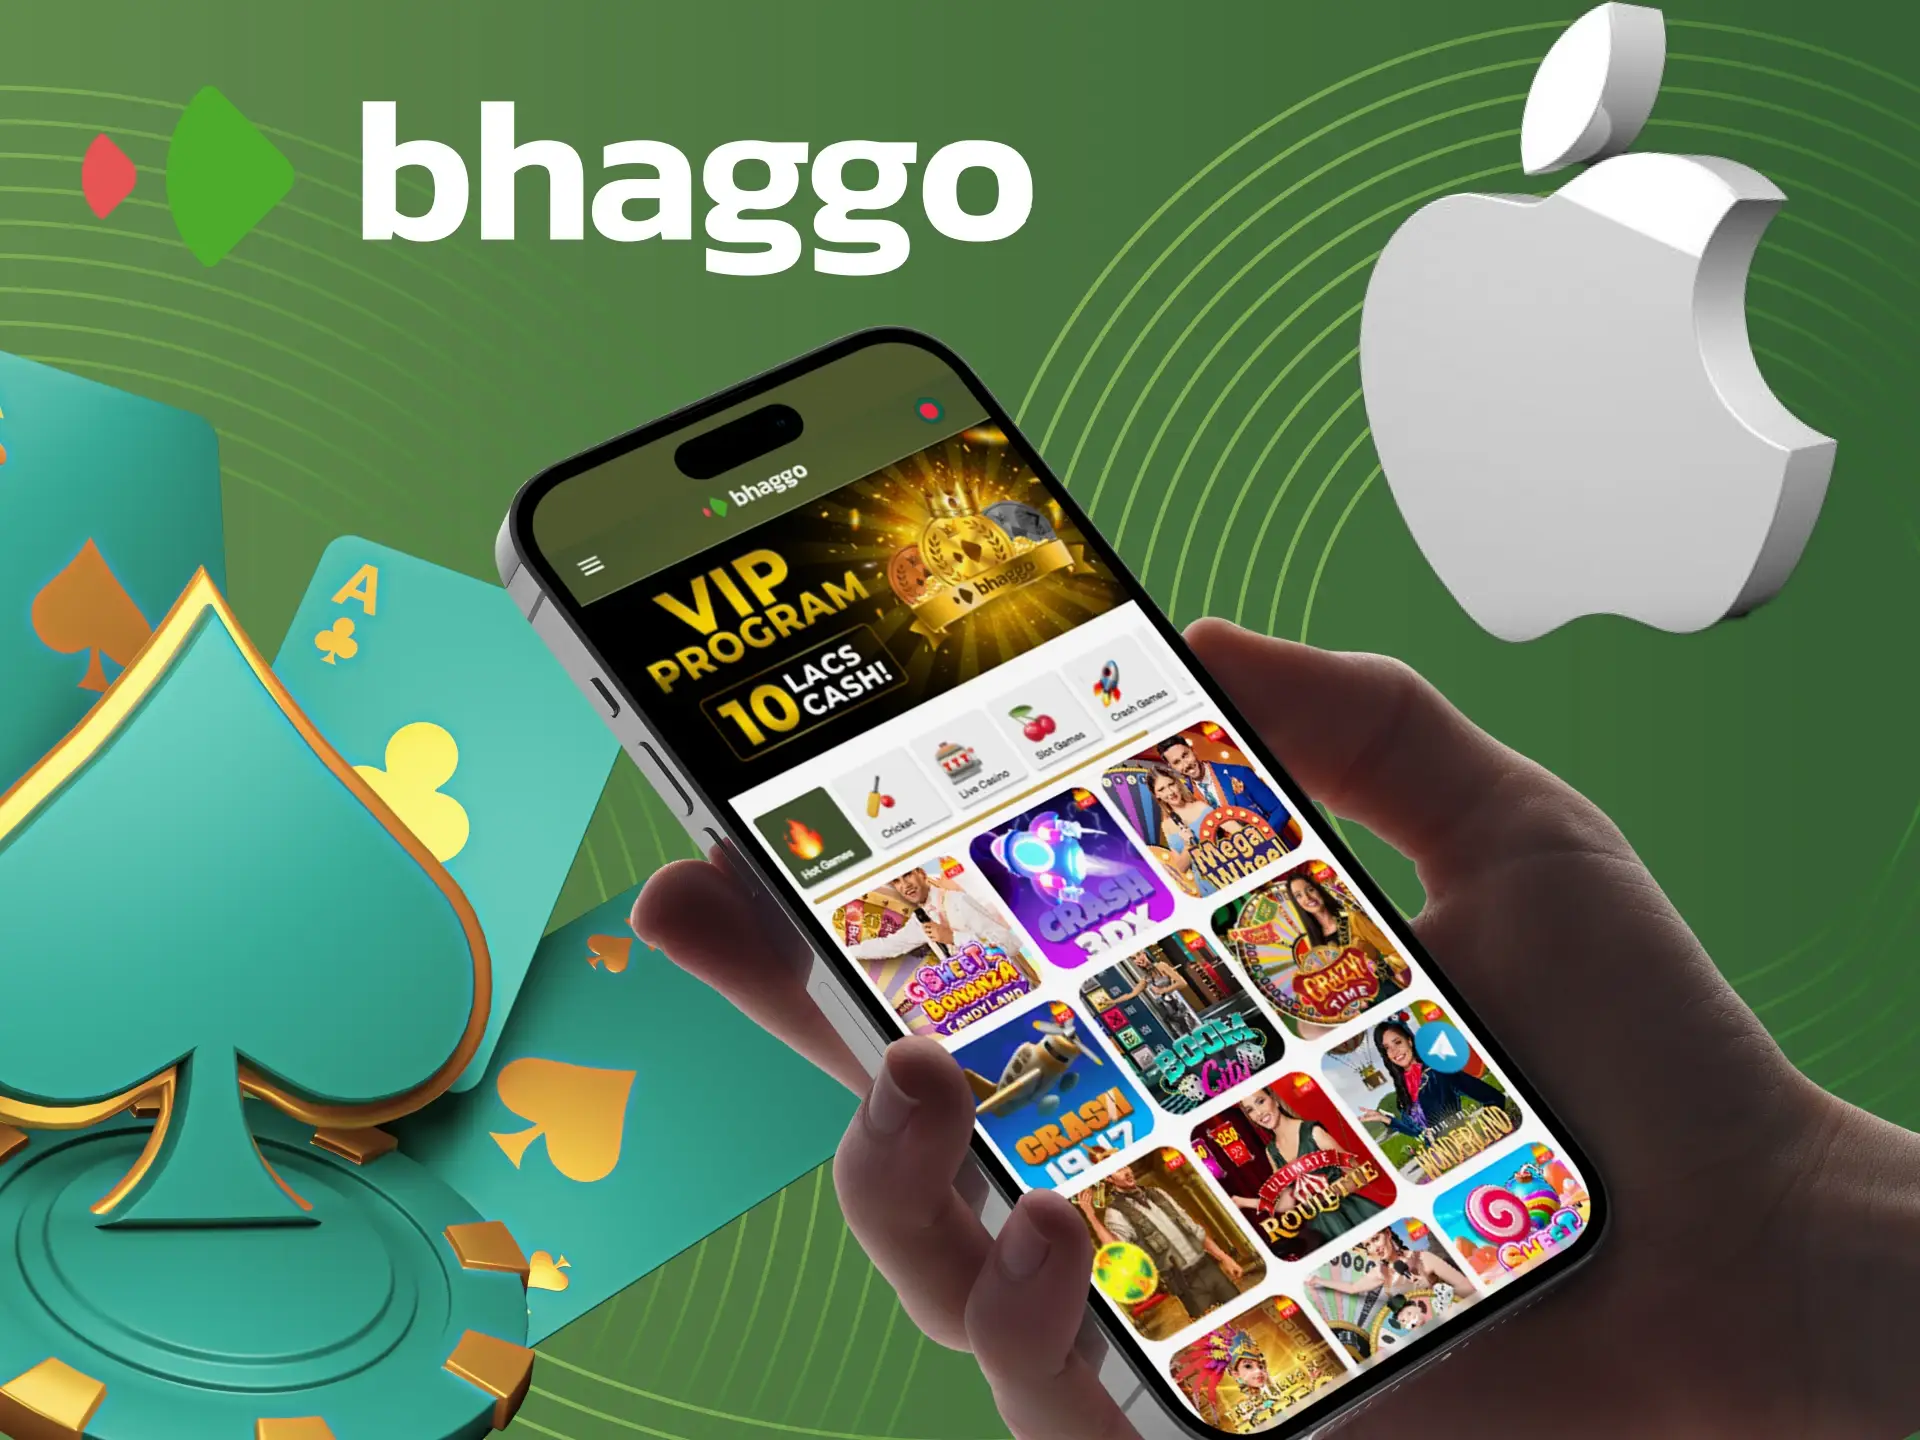 Which iOS devices support the Bhaggo online casino app.